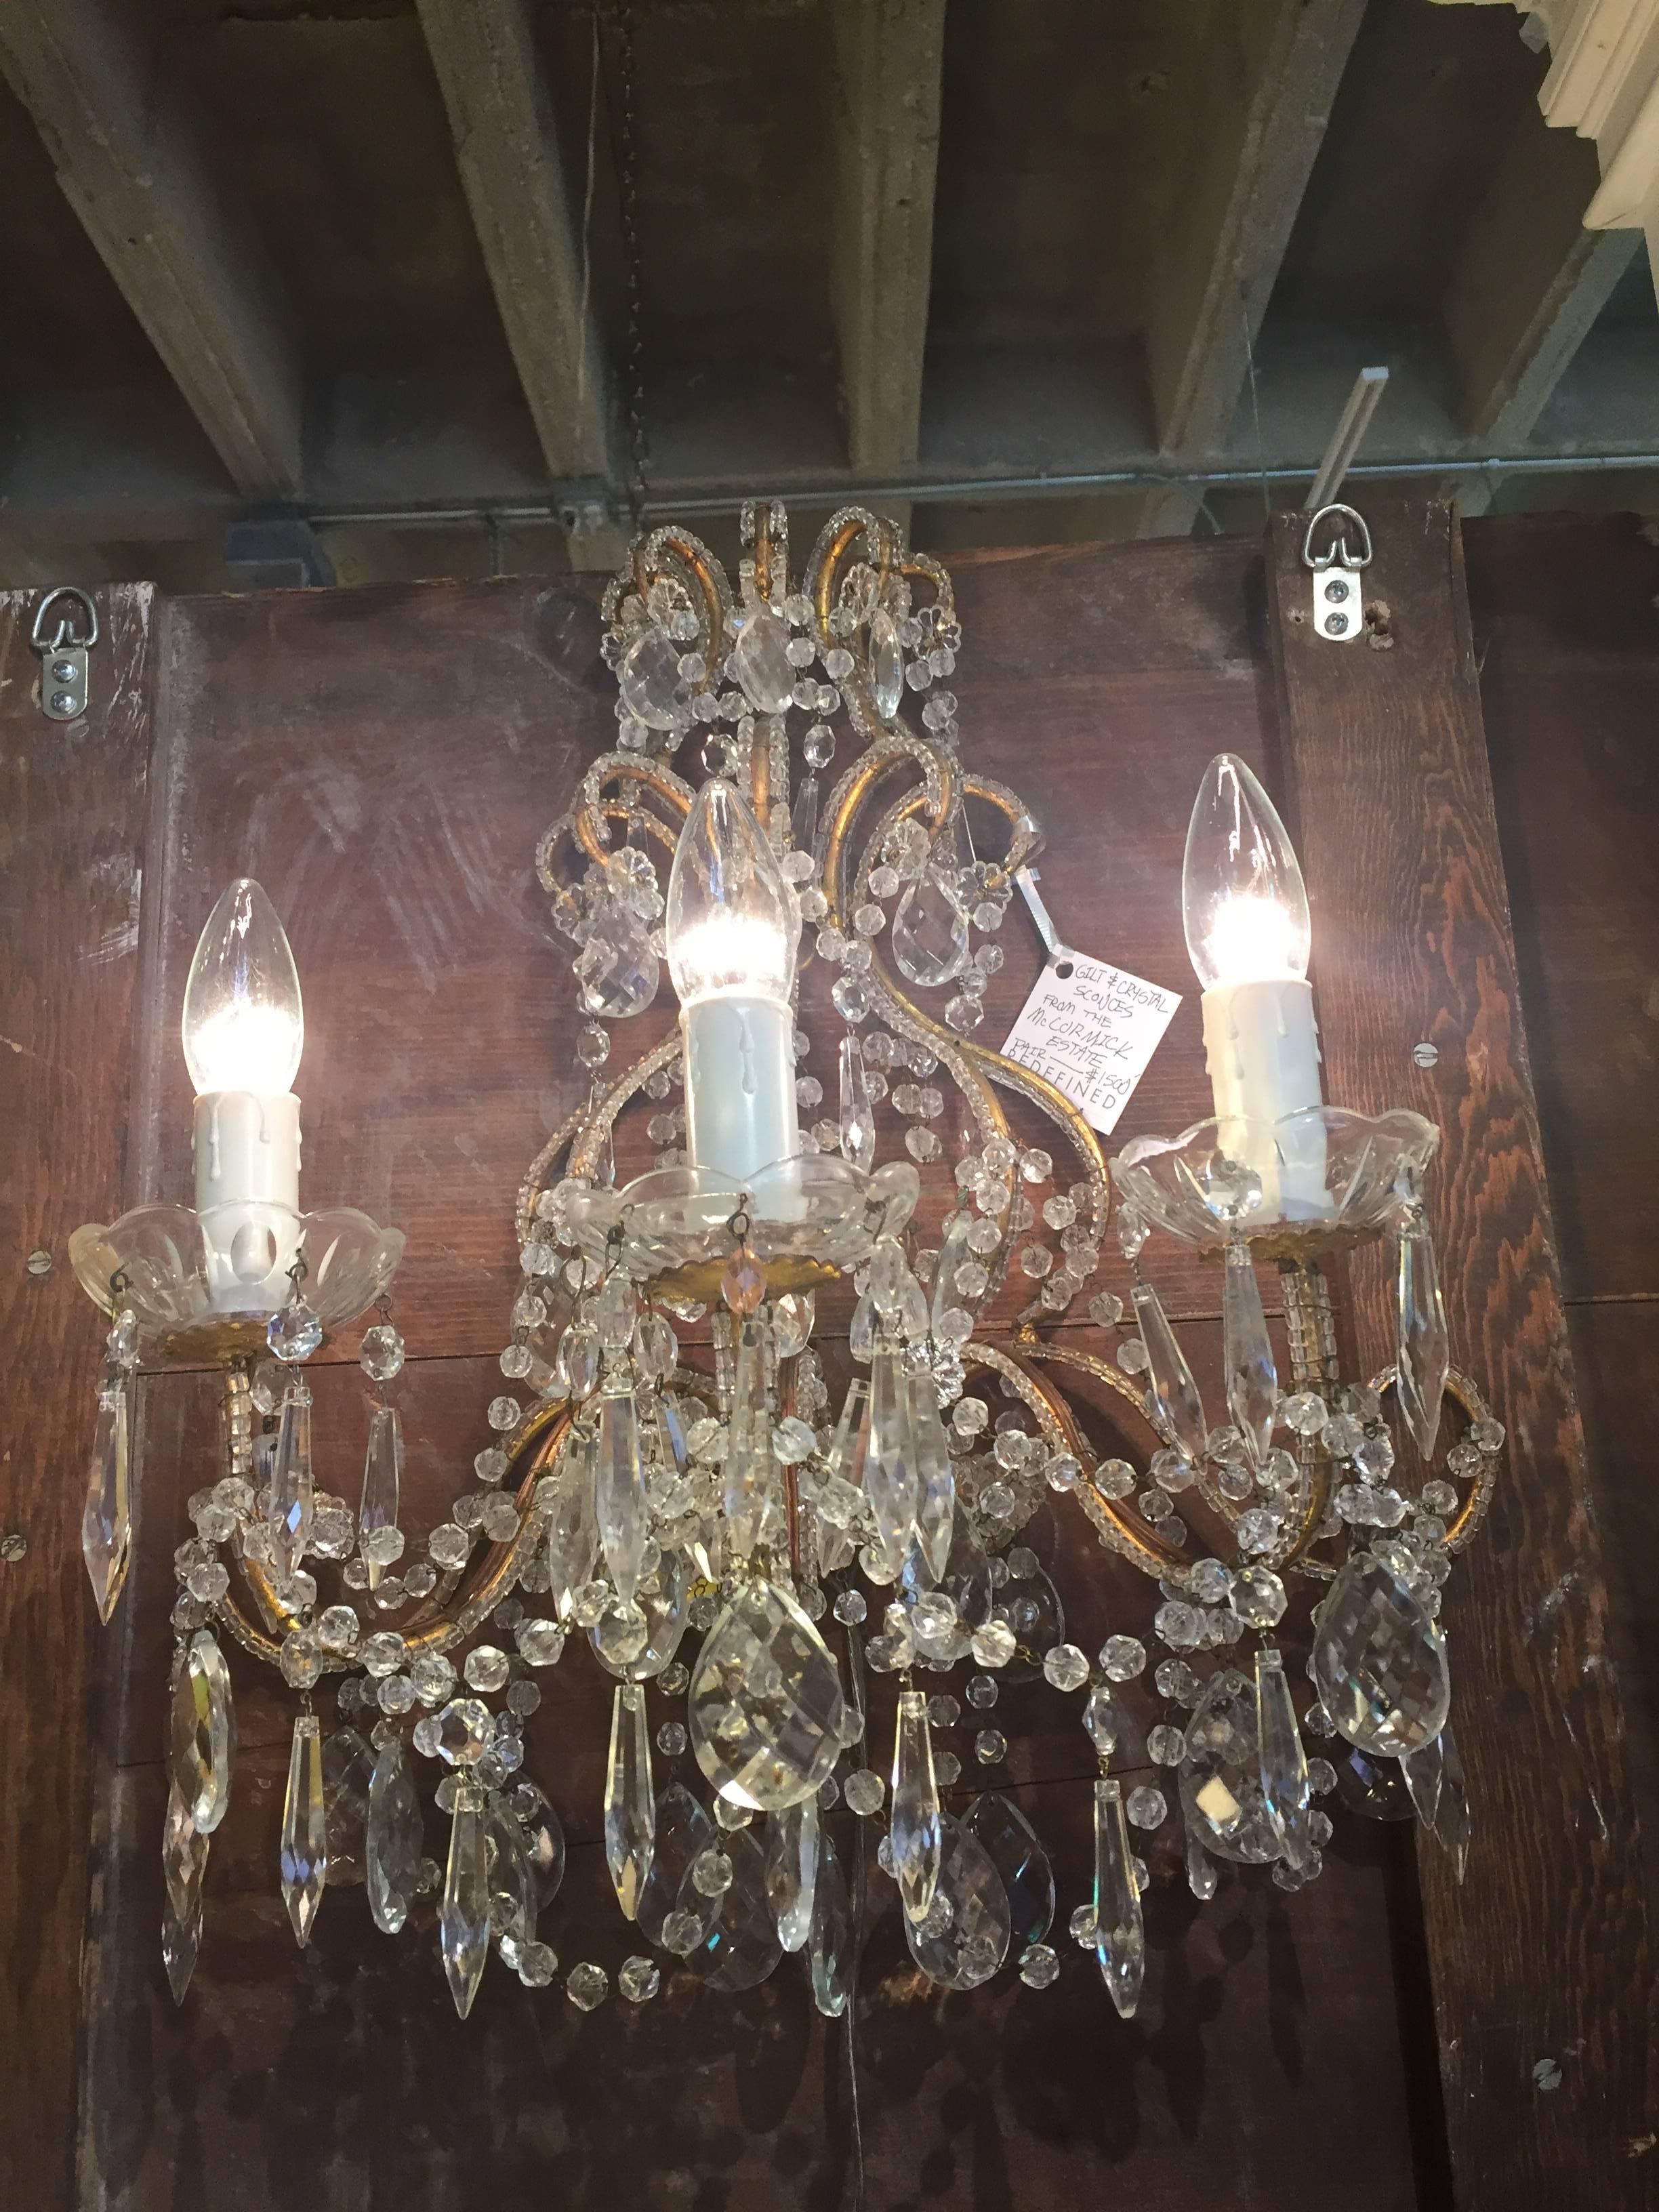 Pair of Mid-Century Italian beaded crystal gilt metal three-light sconces. Decorator Billy Baldwin selected these sconces for an important Lake Forest,
Illinois Estate.